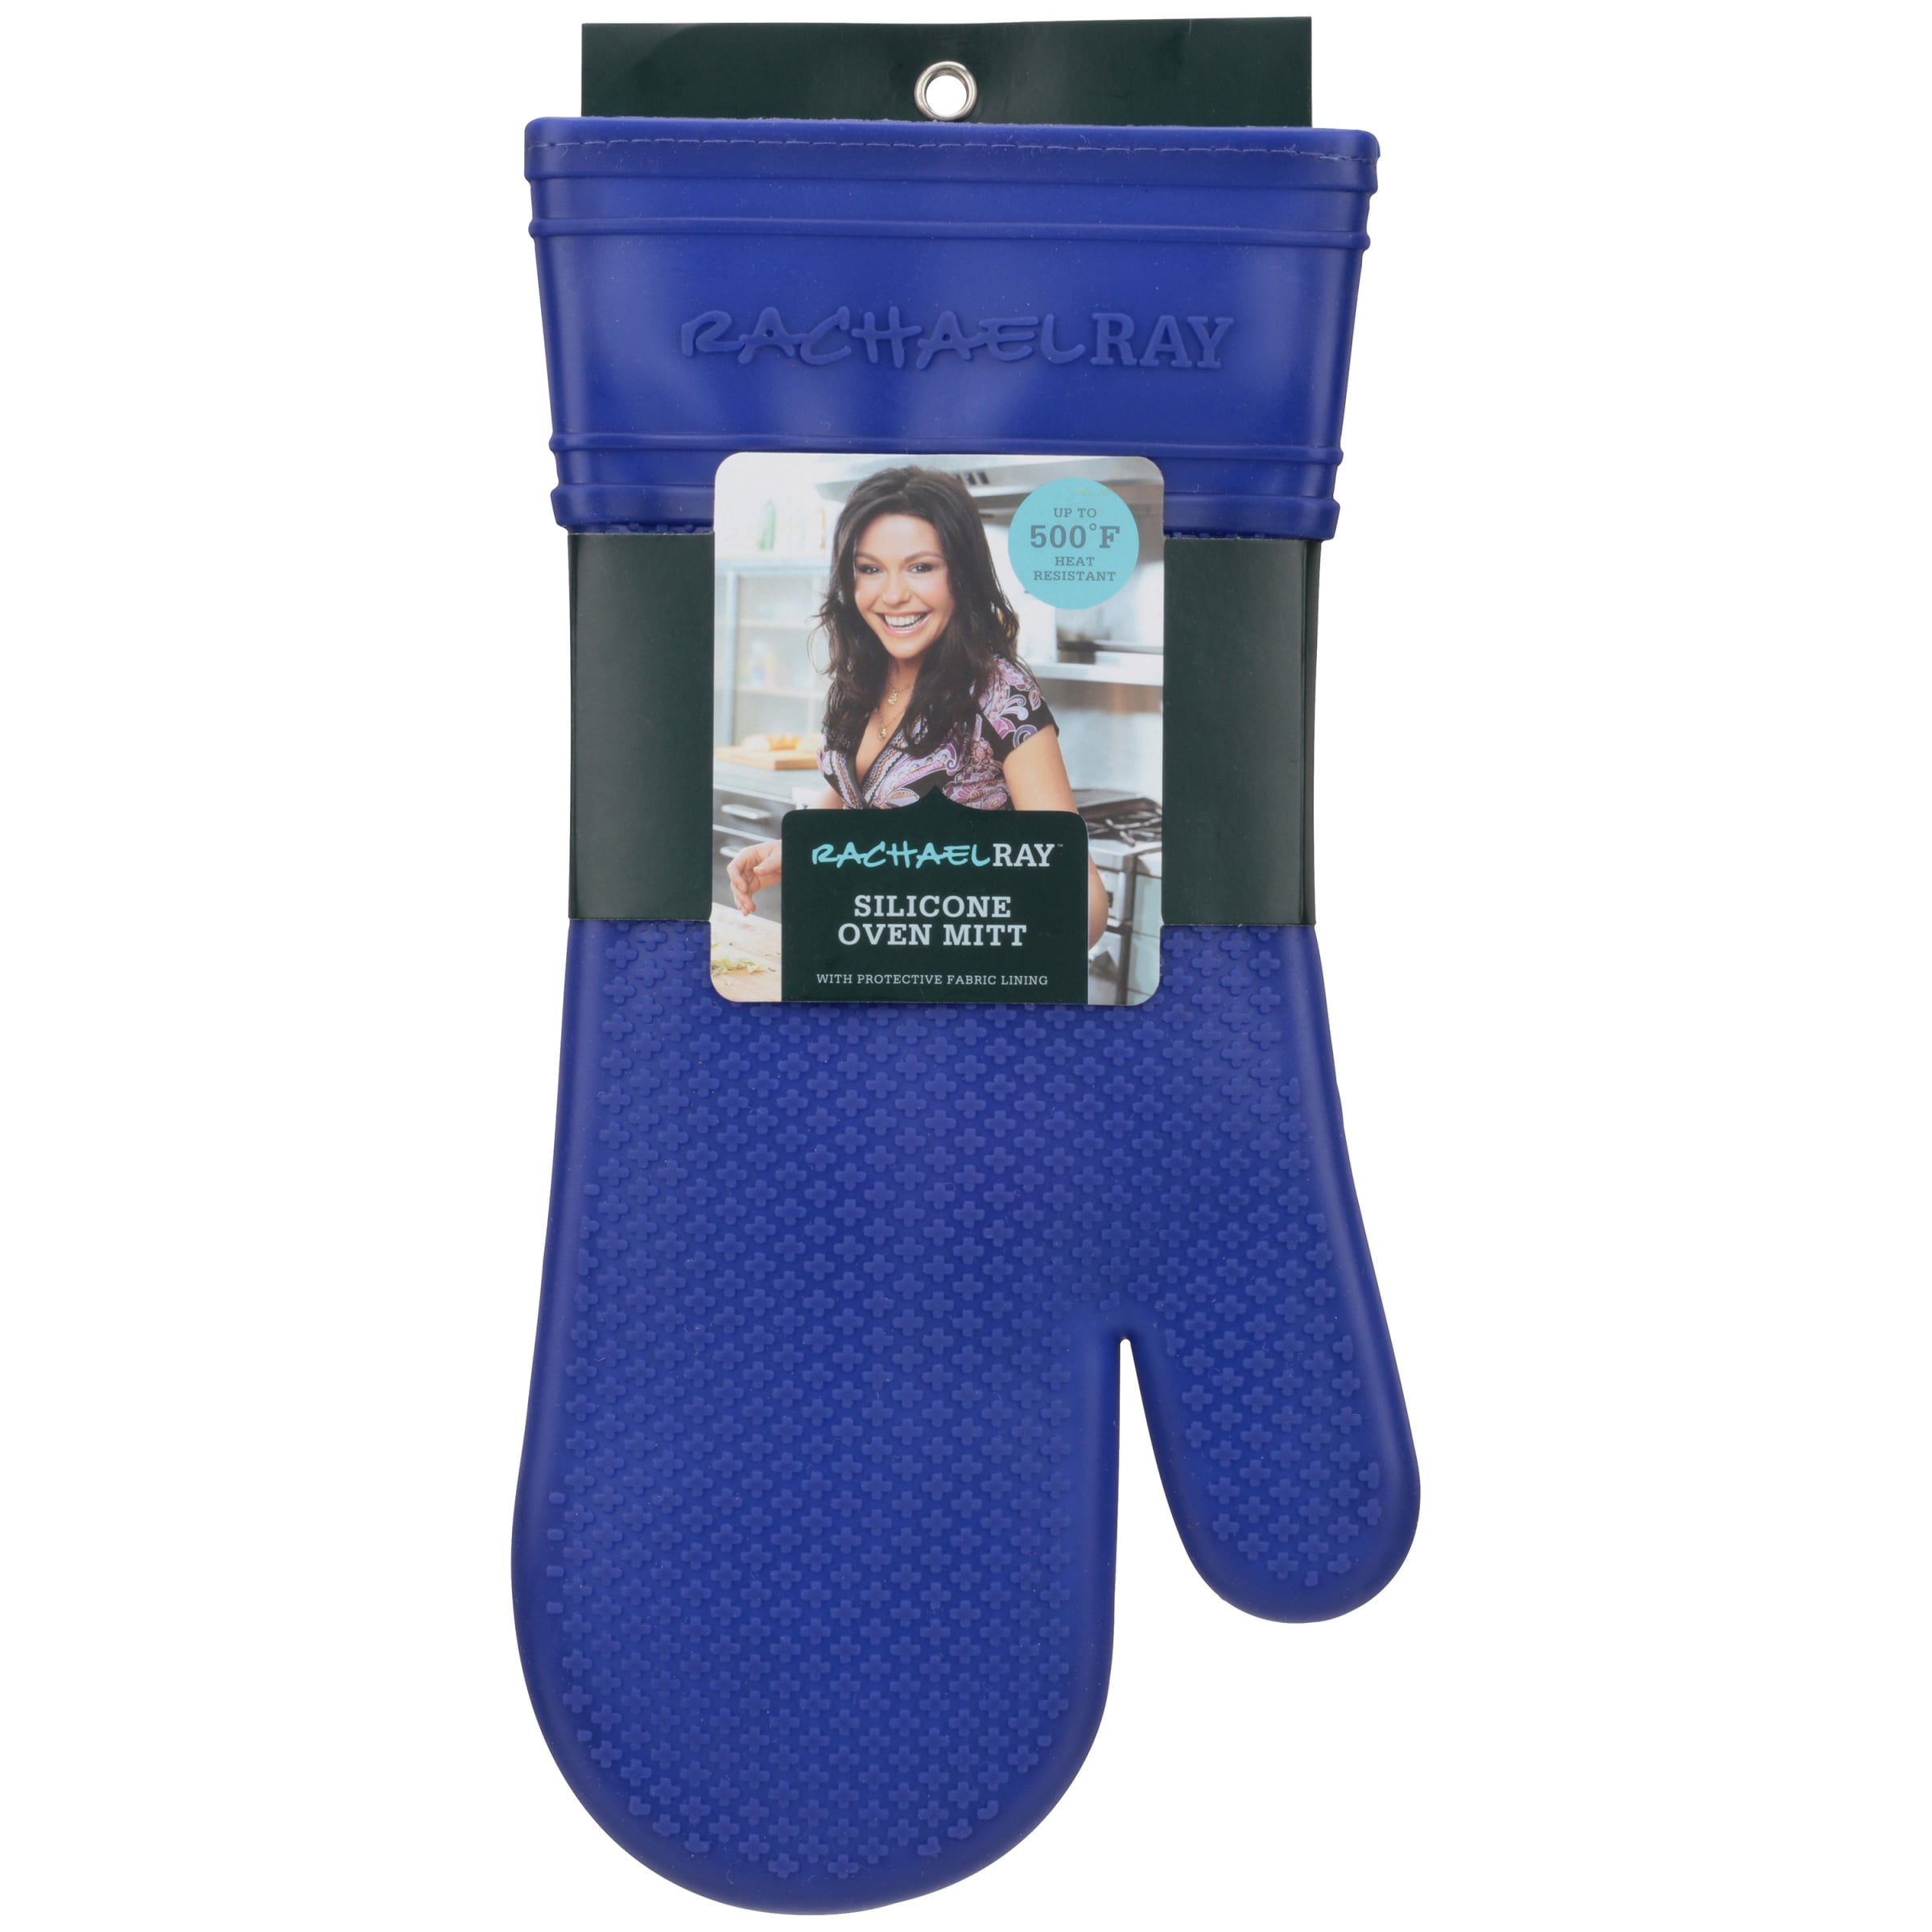 Rachel Ray Silicone Oven Mitt Glove W/ Protective Fabric Lining Blue